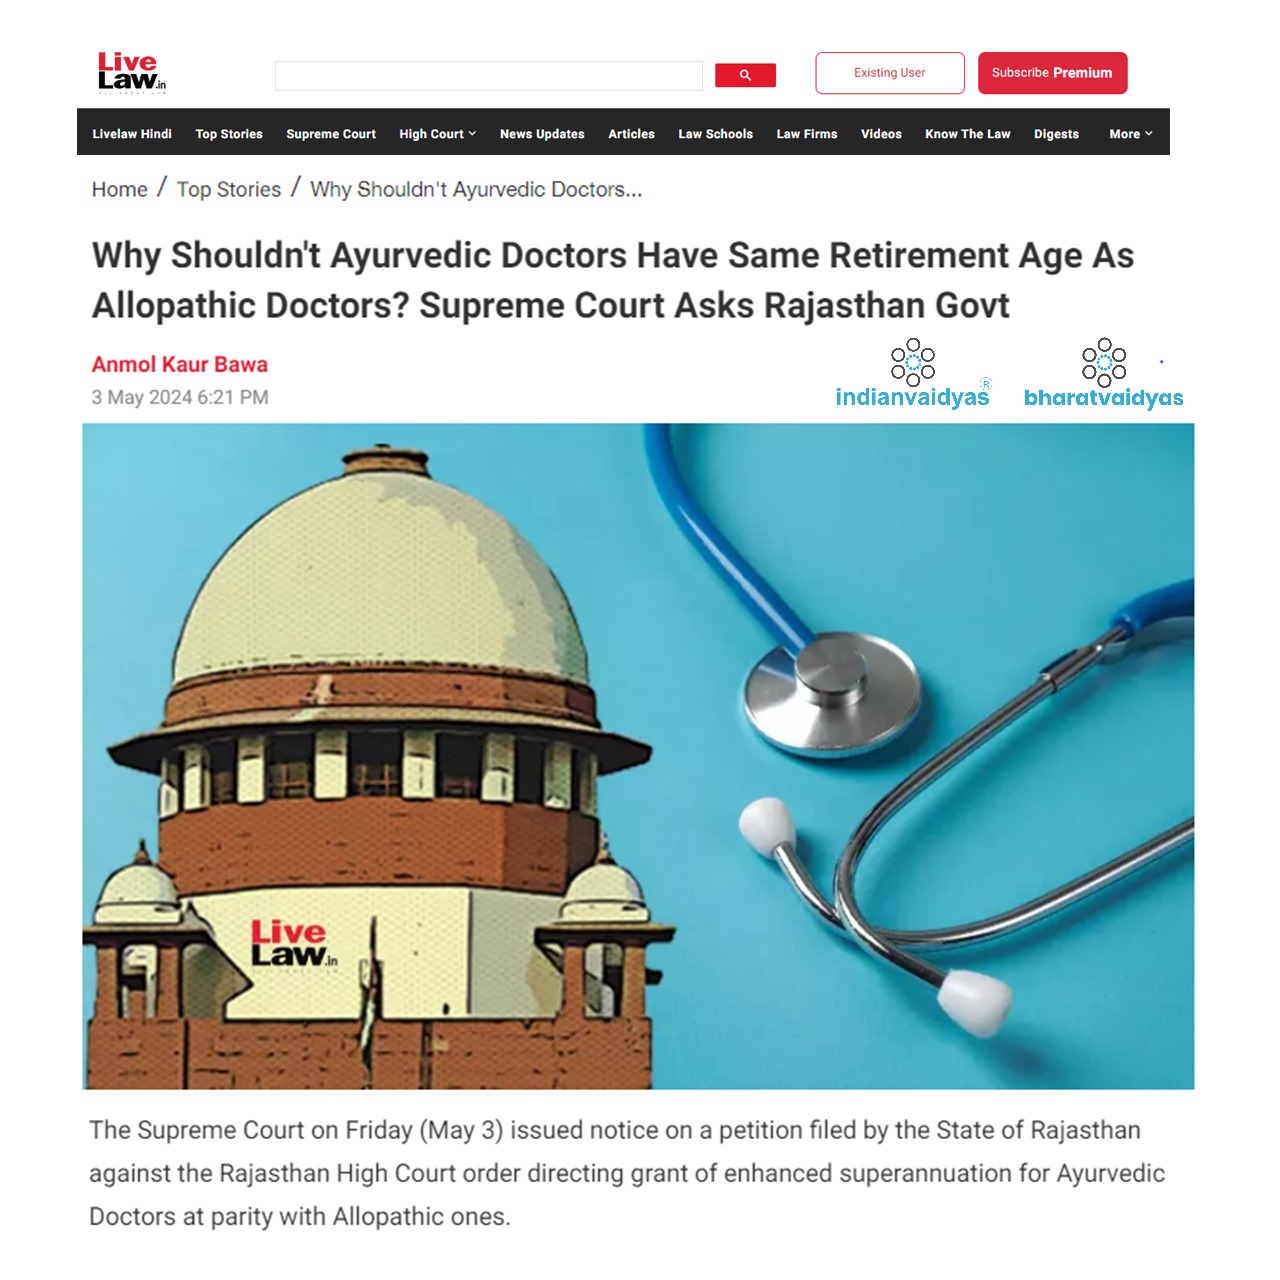 Why Shouldn't Ayurvedic Doctors Have Same Retirement Age As Allopathic Doctors? Supreme Court Asks Rajasthan Govt